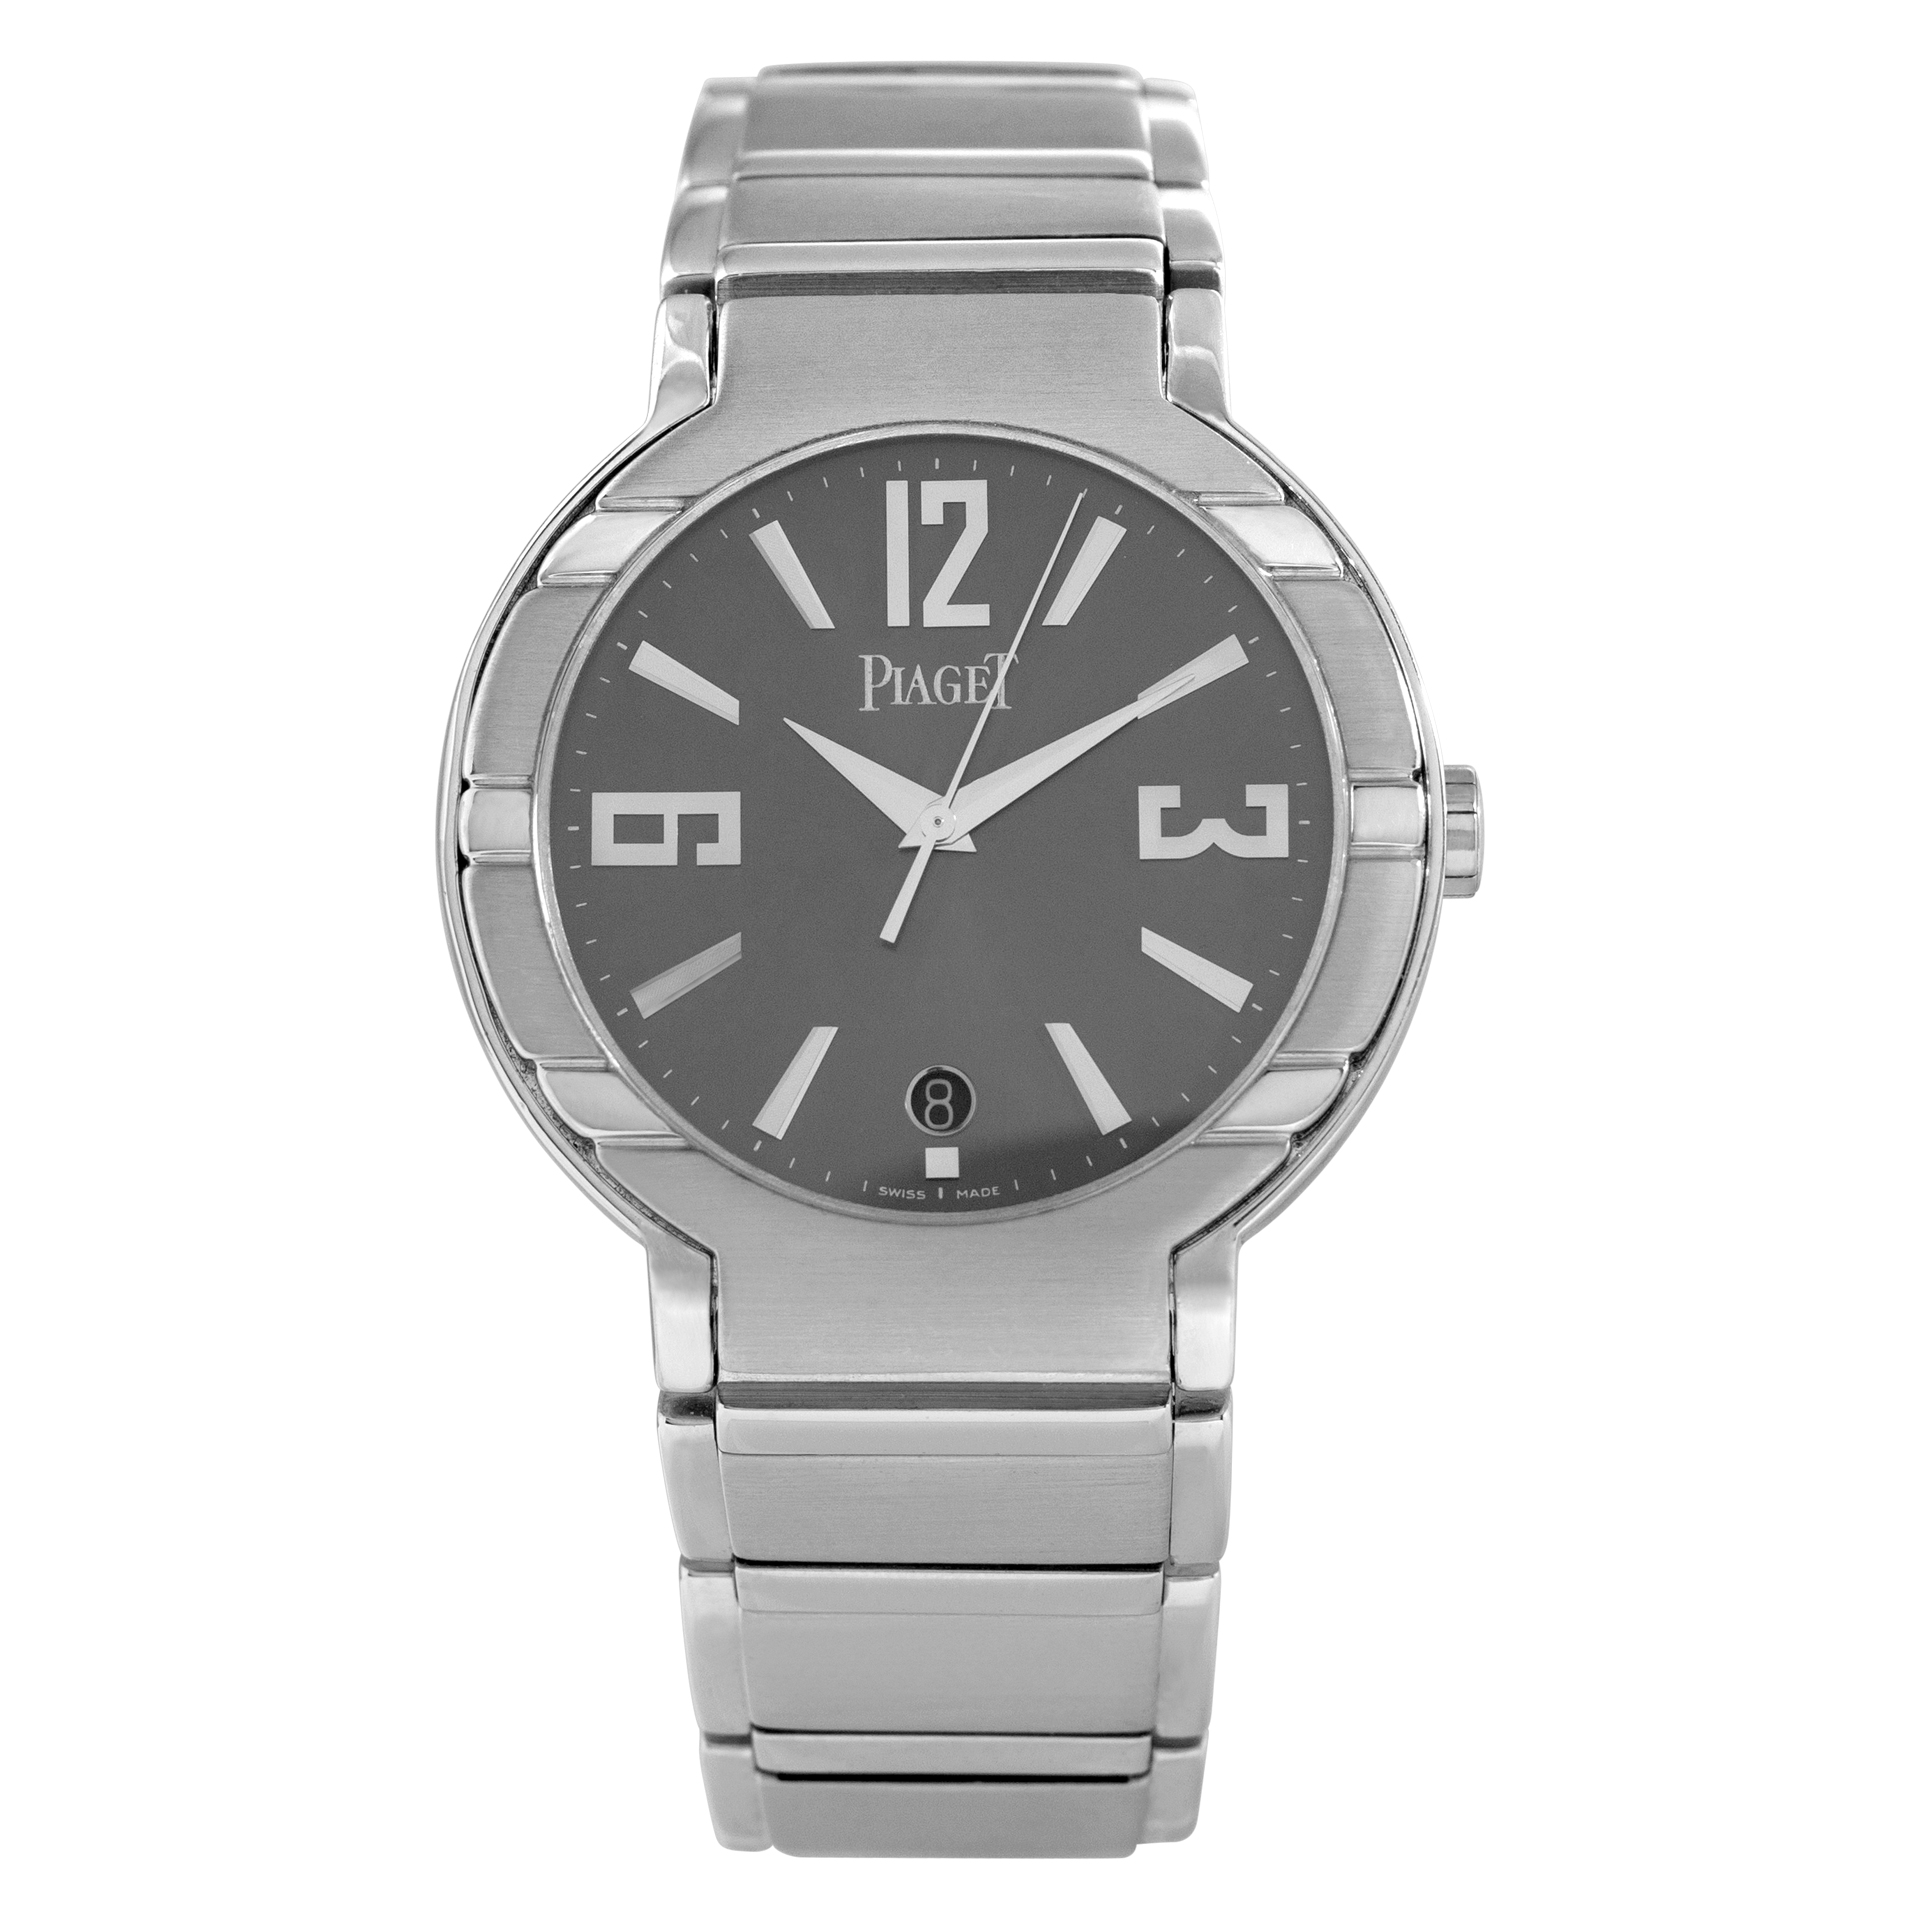 Piaget Polo 38mm 27700 G0A26020